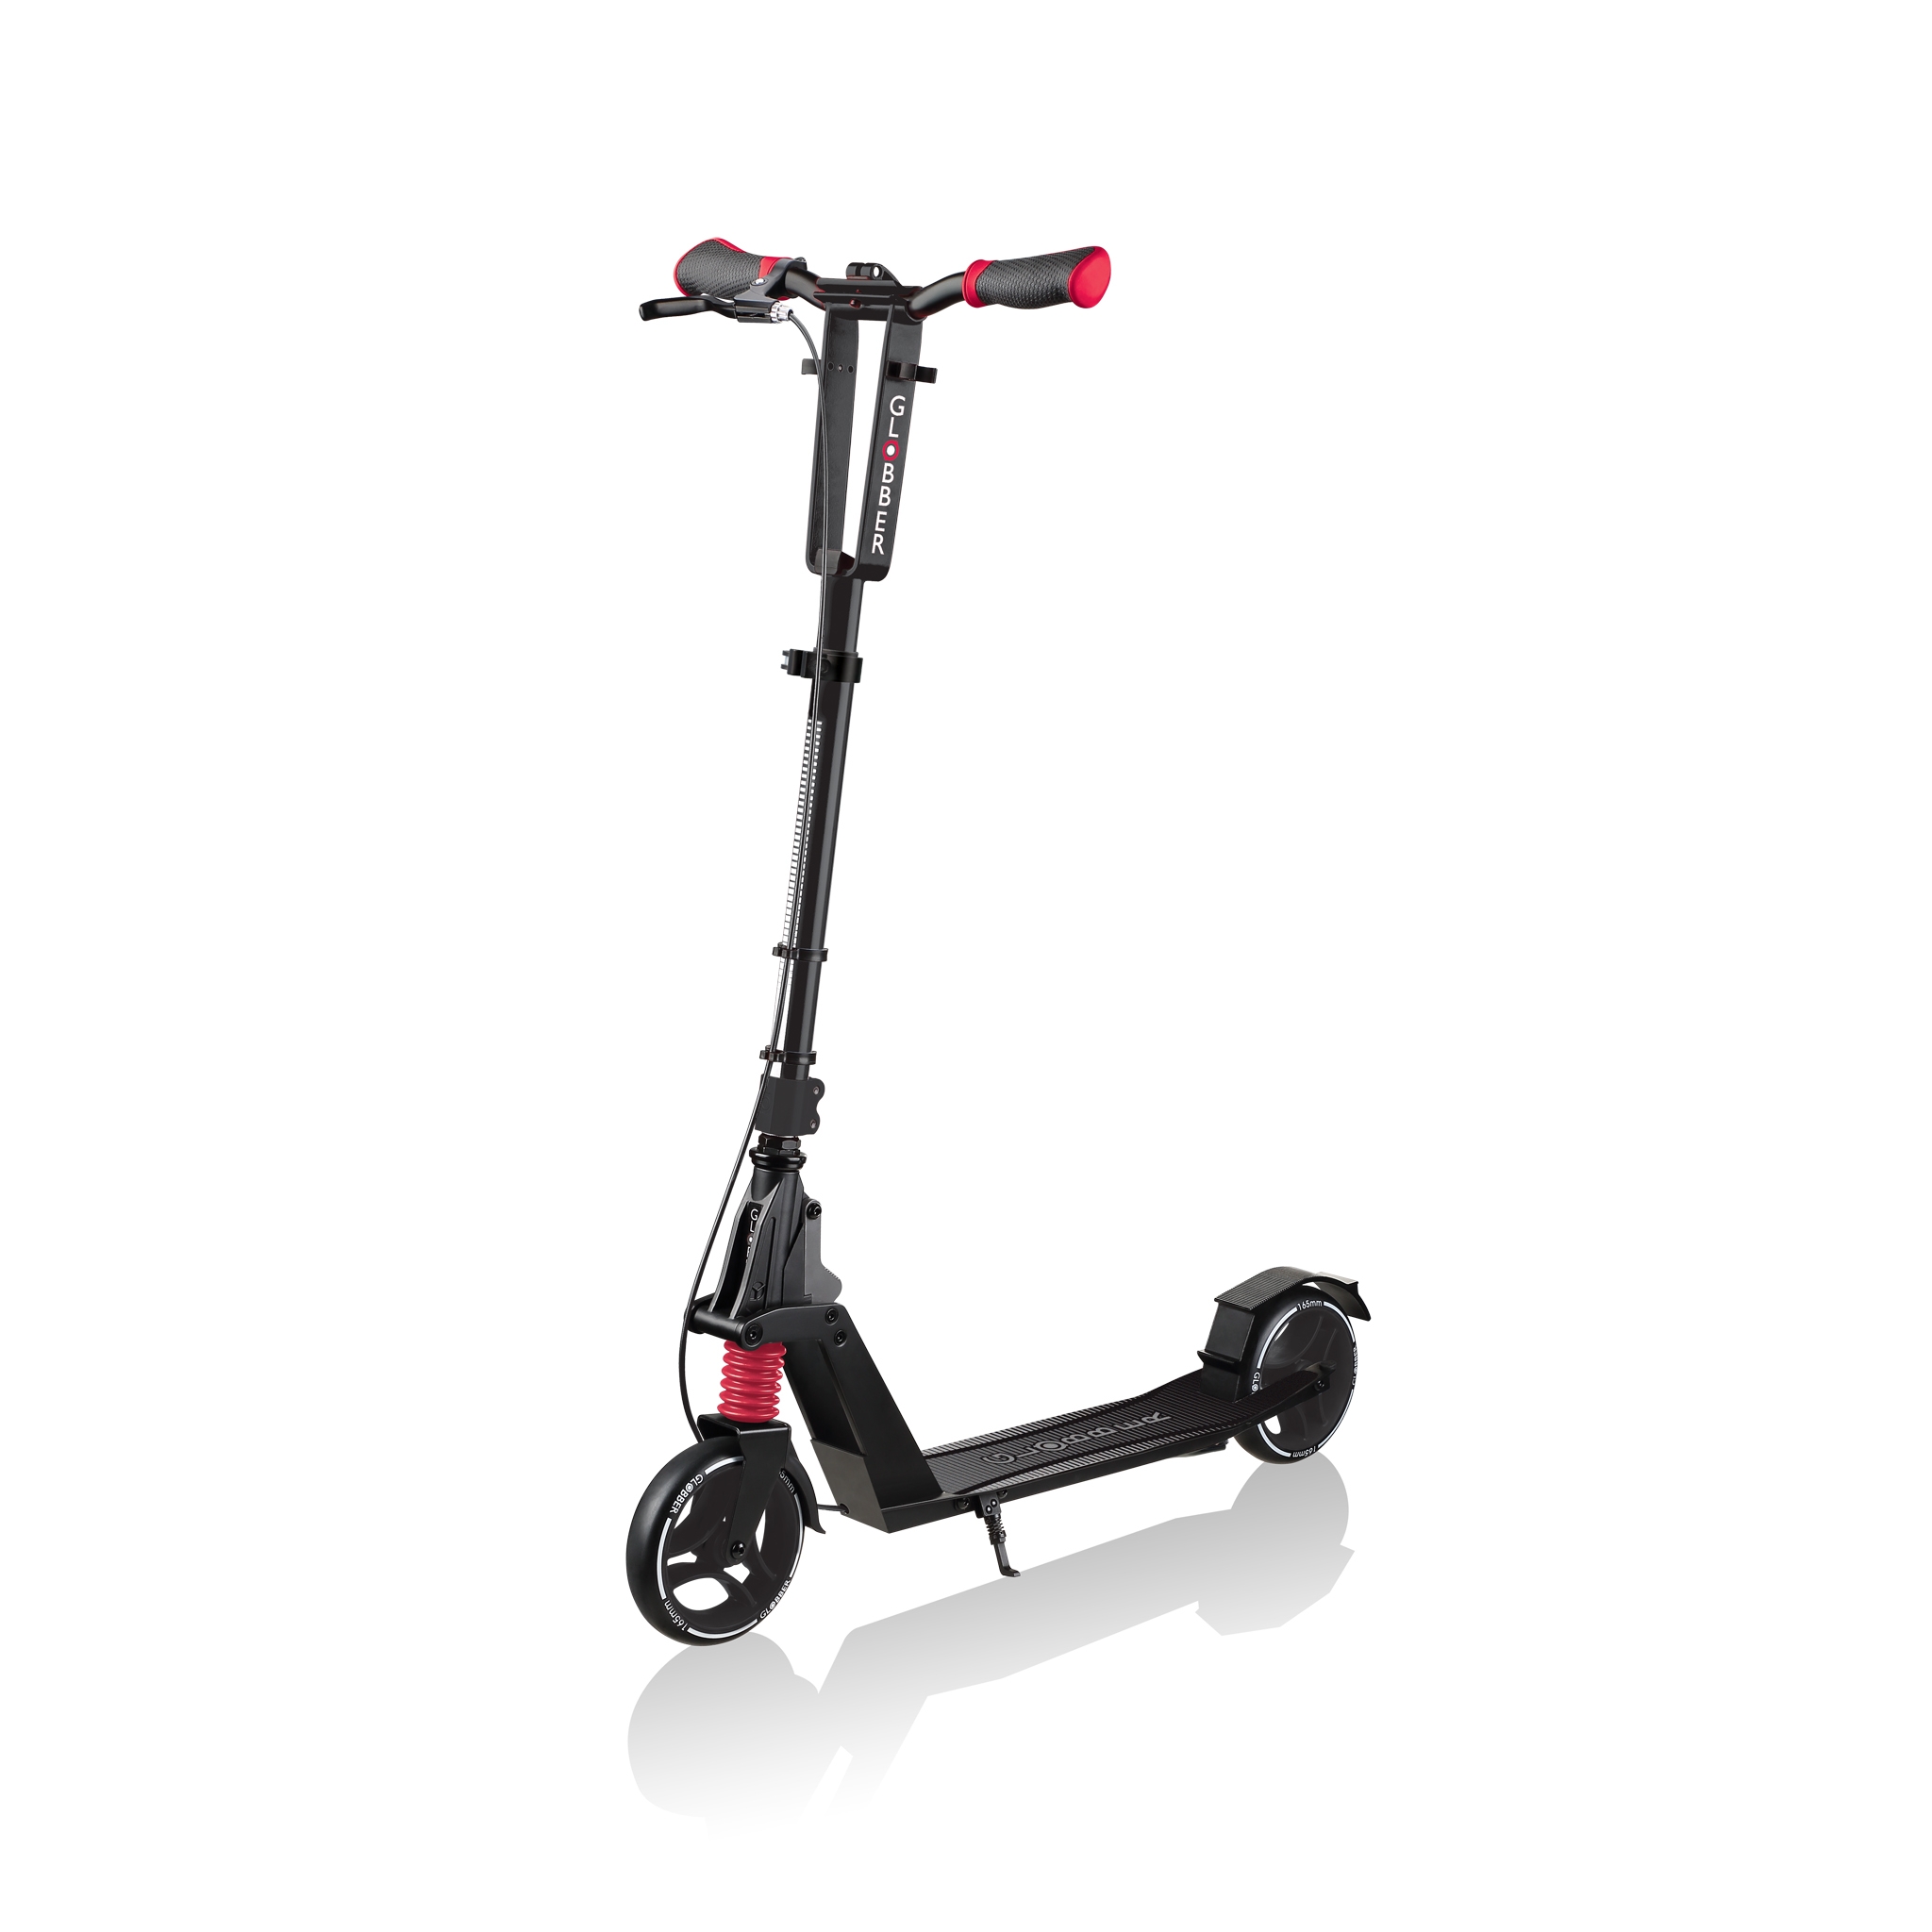 ONE-K-165-BR-award-winning-2-wheel-foldable-scooter-for-teens-and-adults-aged-14-and-above_black 0